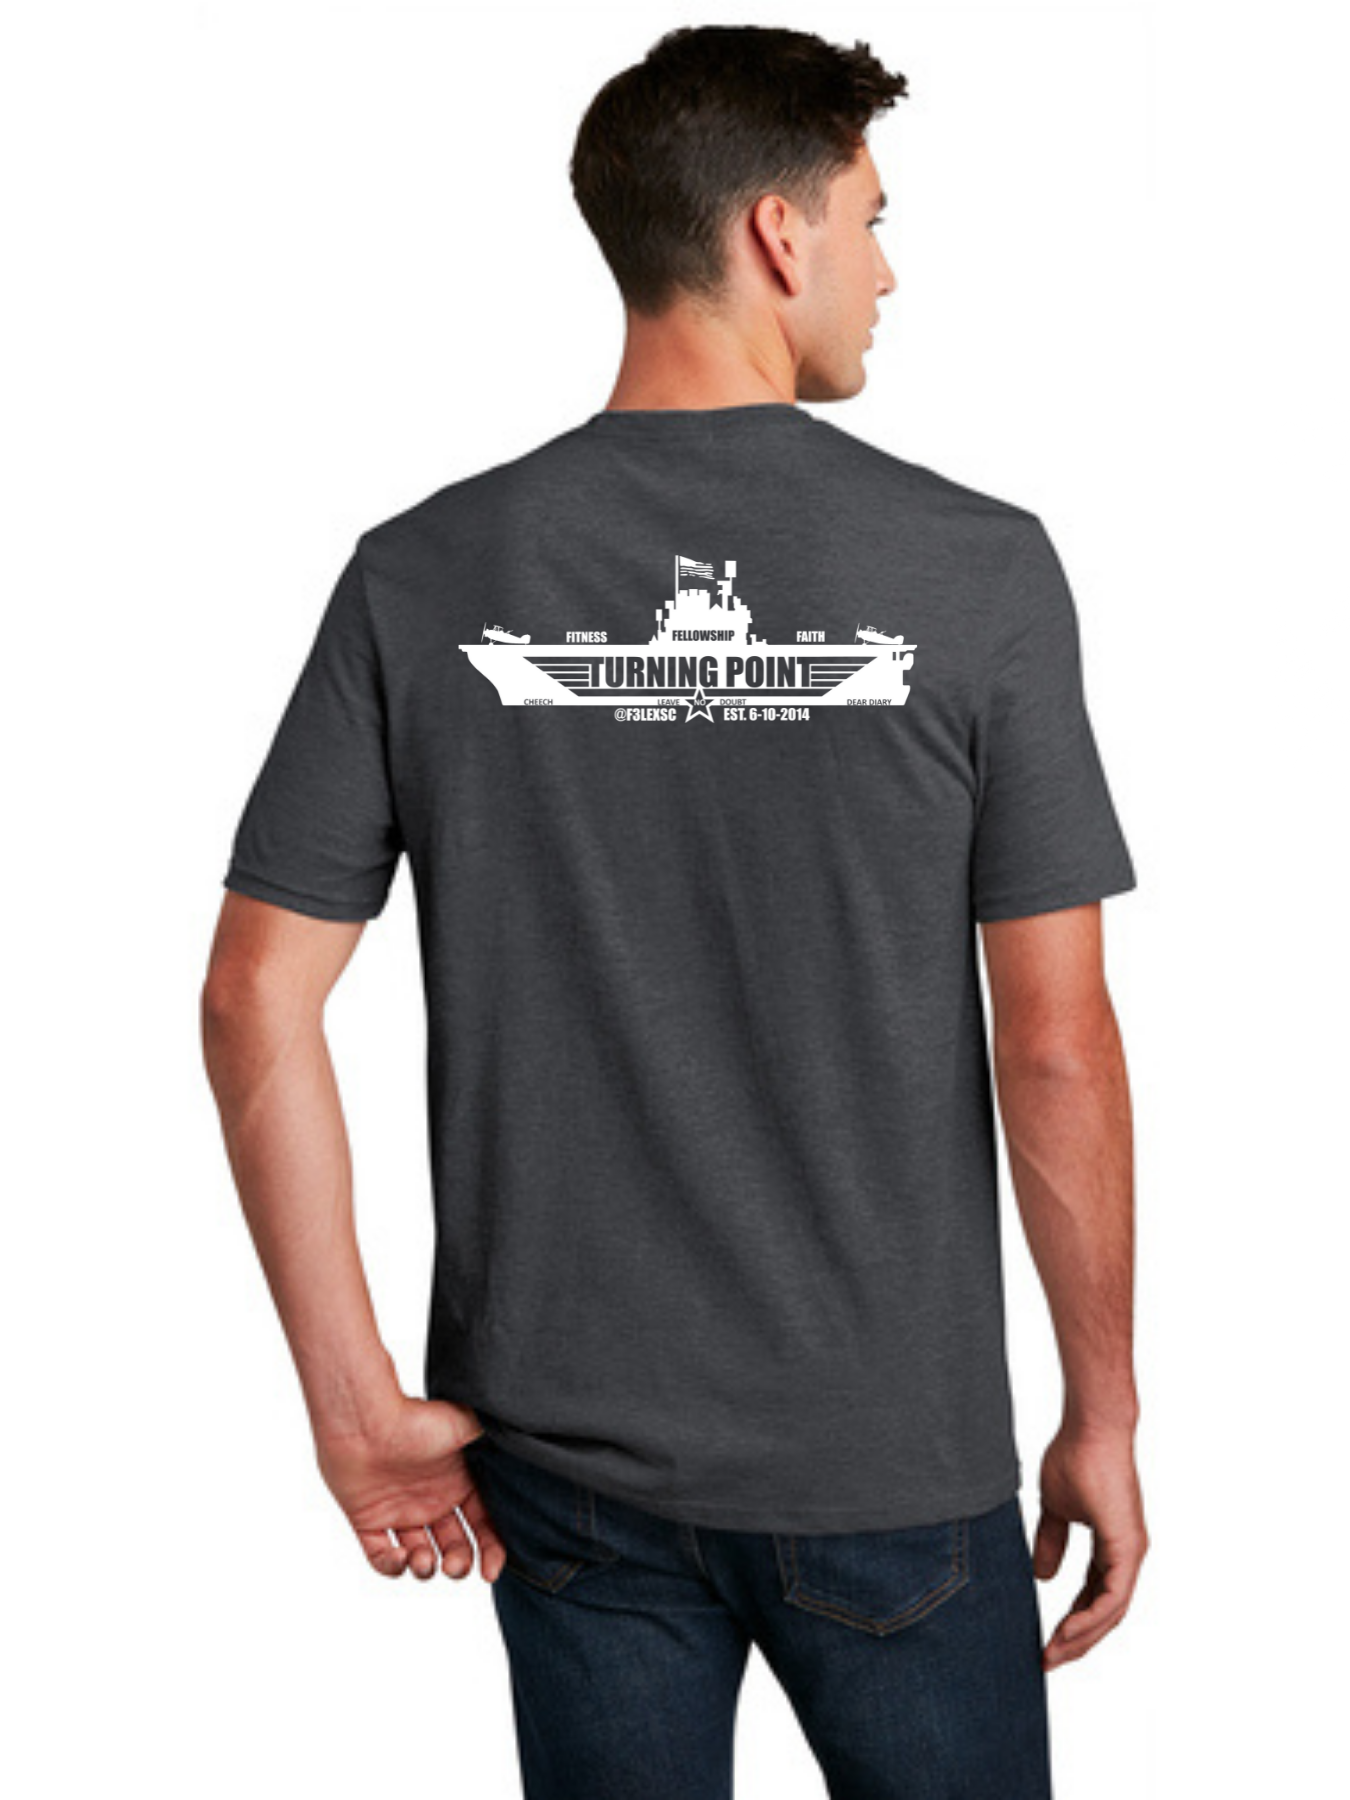 F3 Turning Point Shirt Pre-Order May 2022